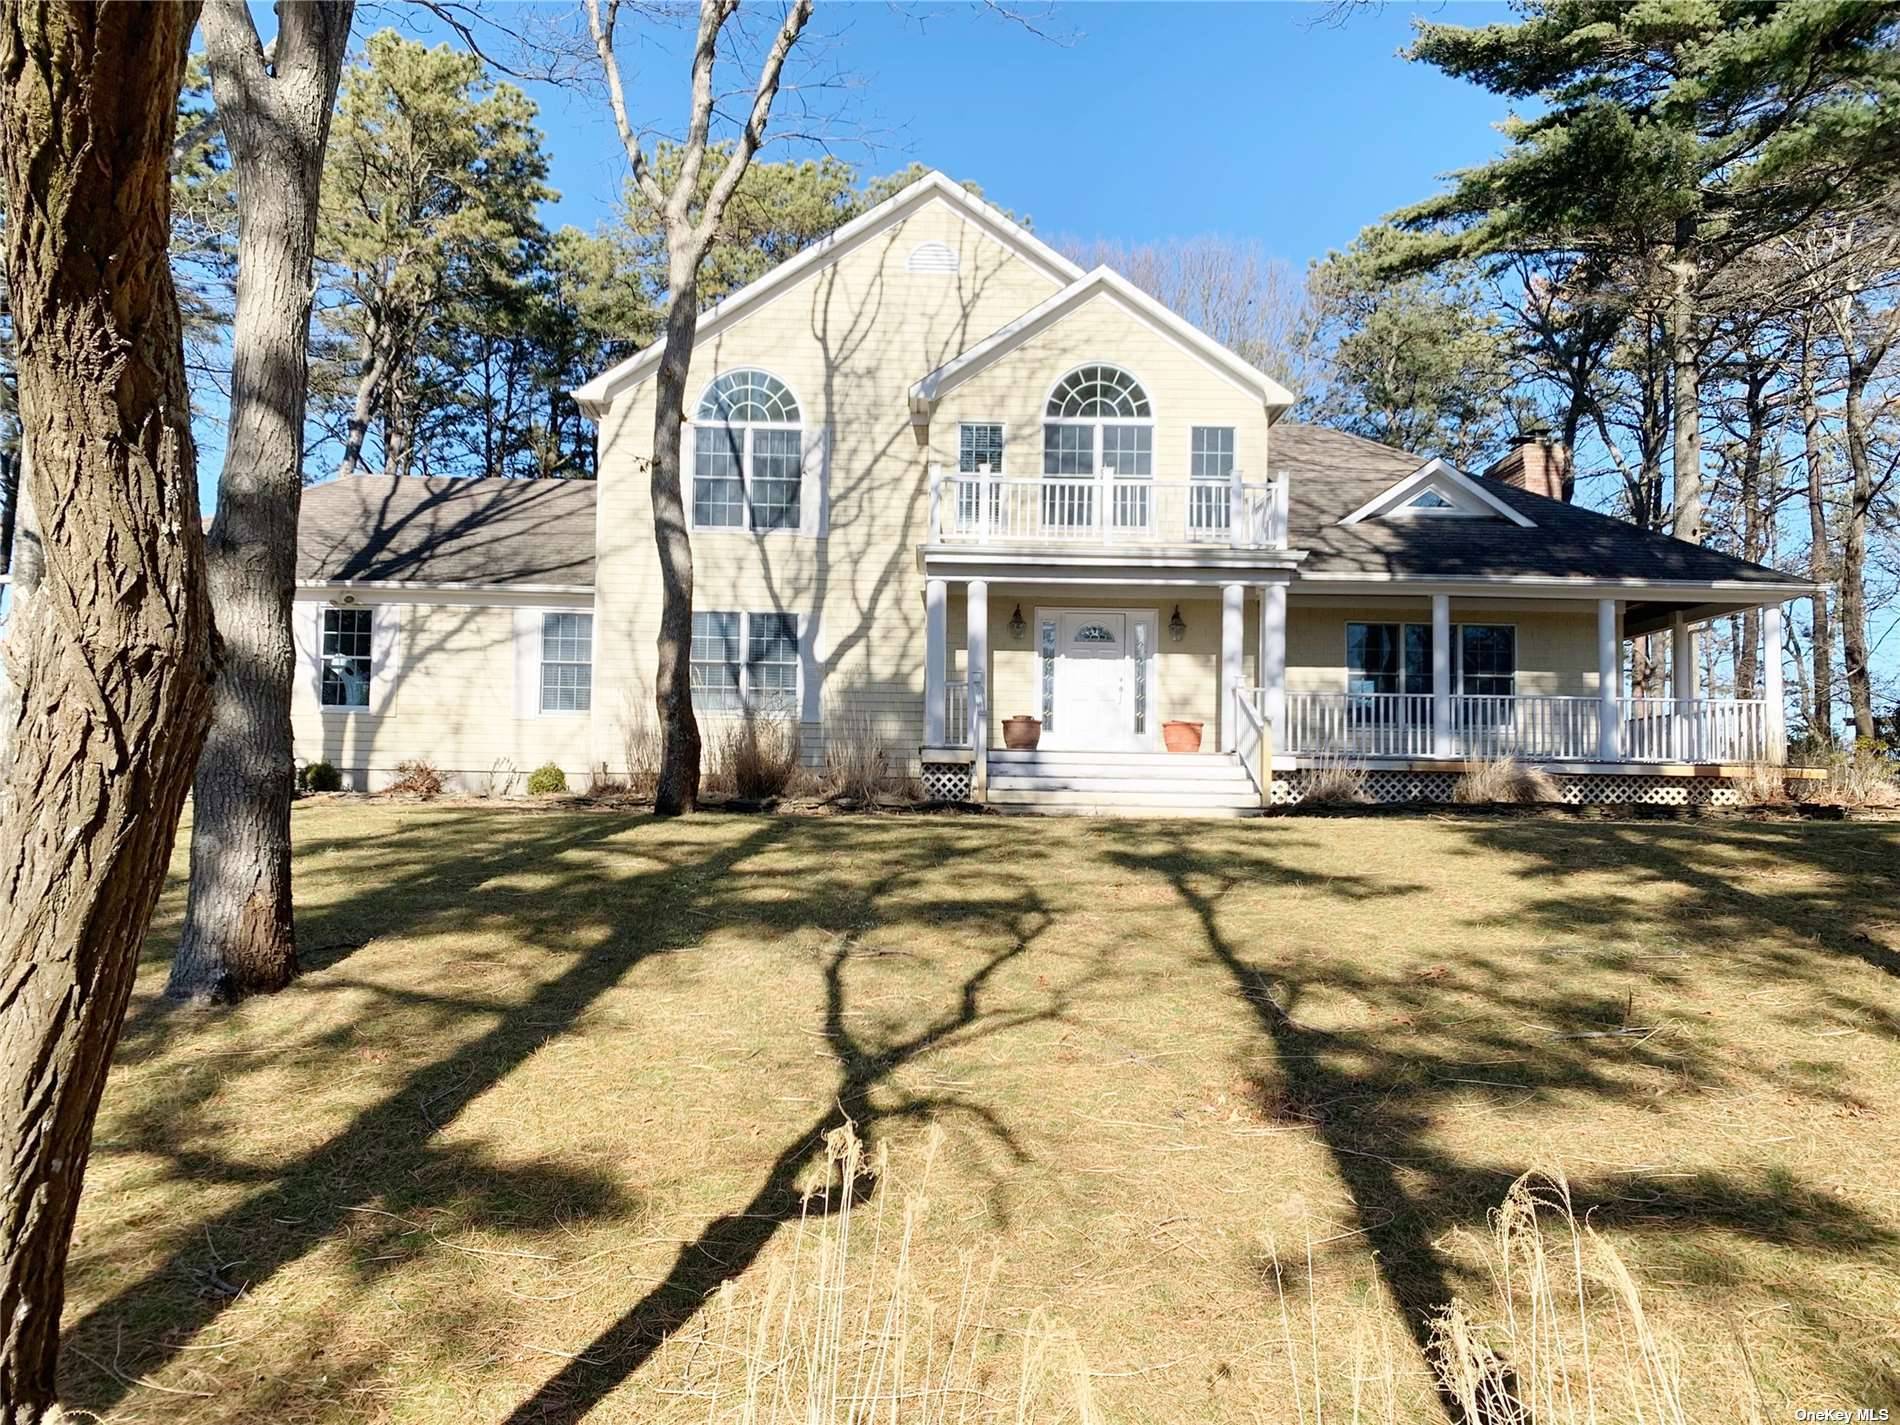 Hampton Bays Rental Get your peace and quiet here.